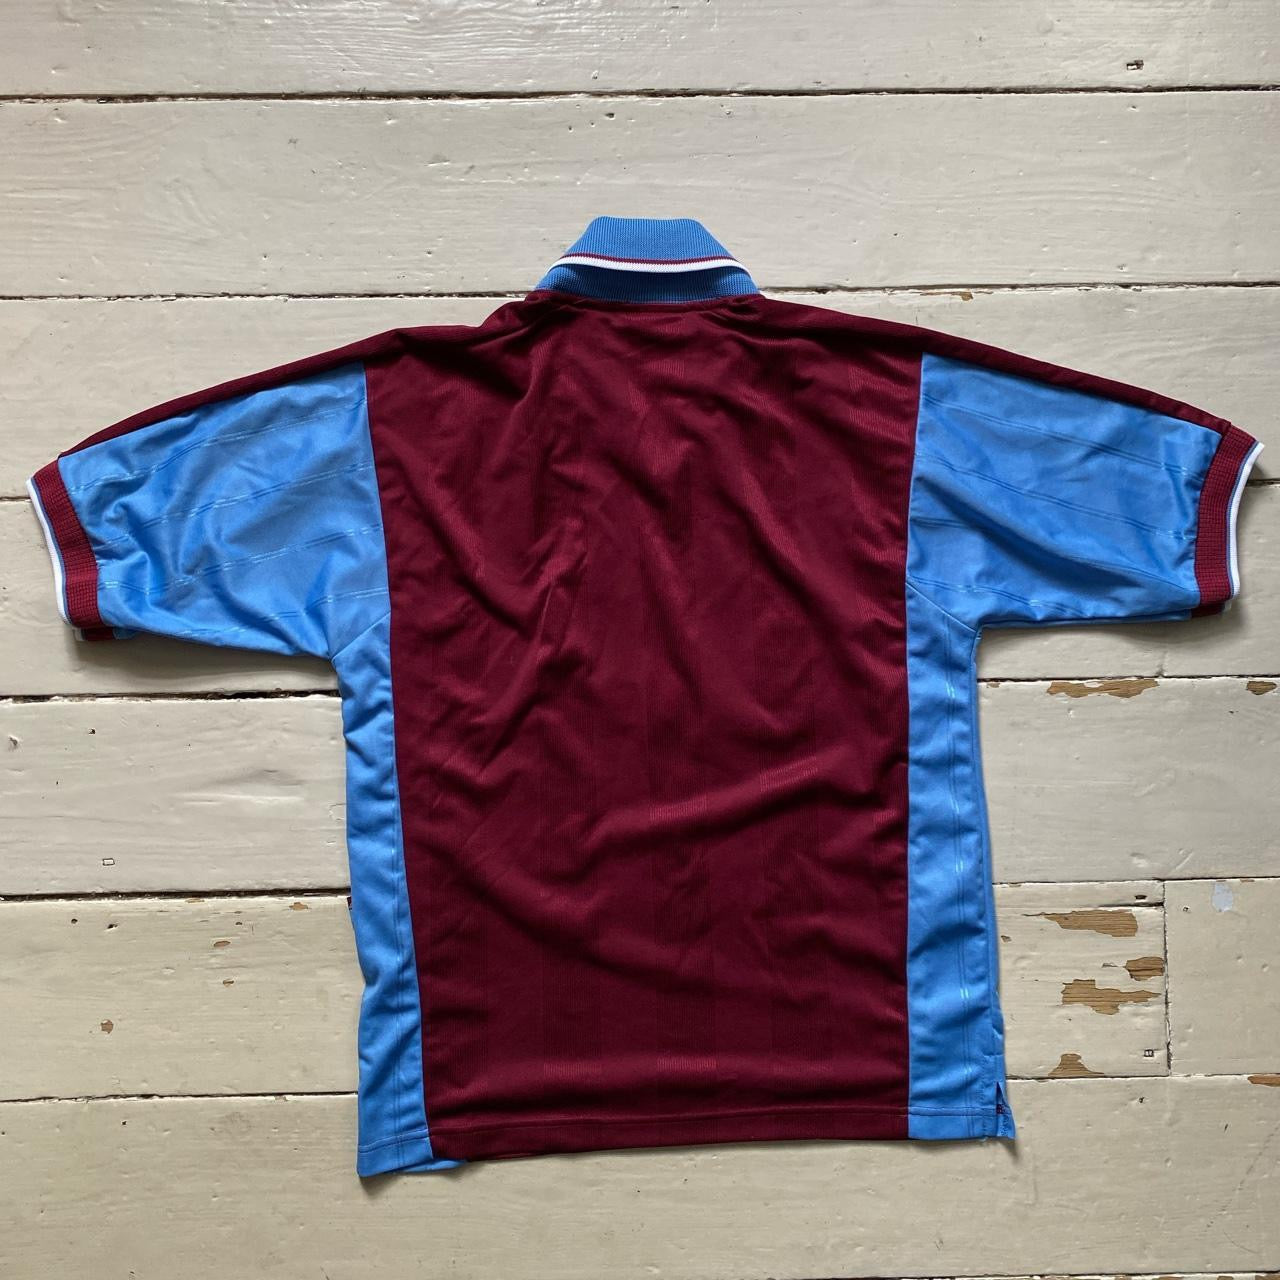 West Ham Dr Martens Pony Jersey (Small)